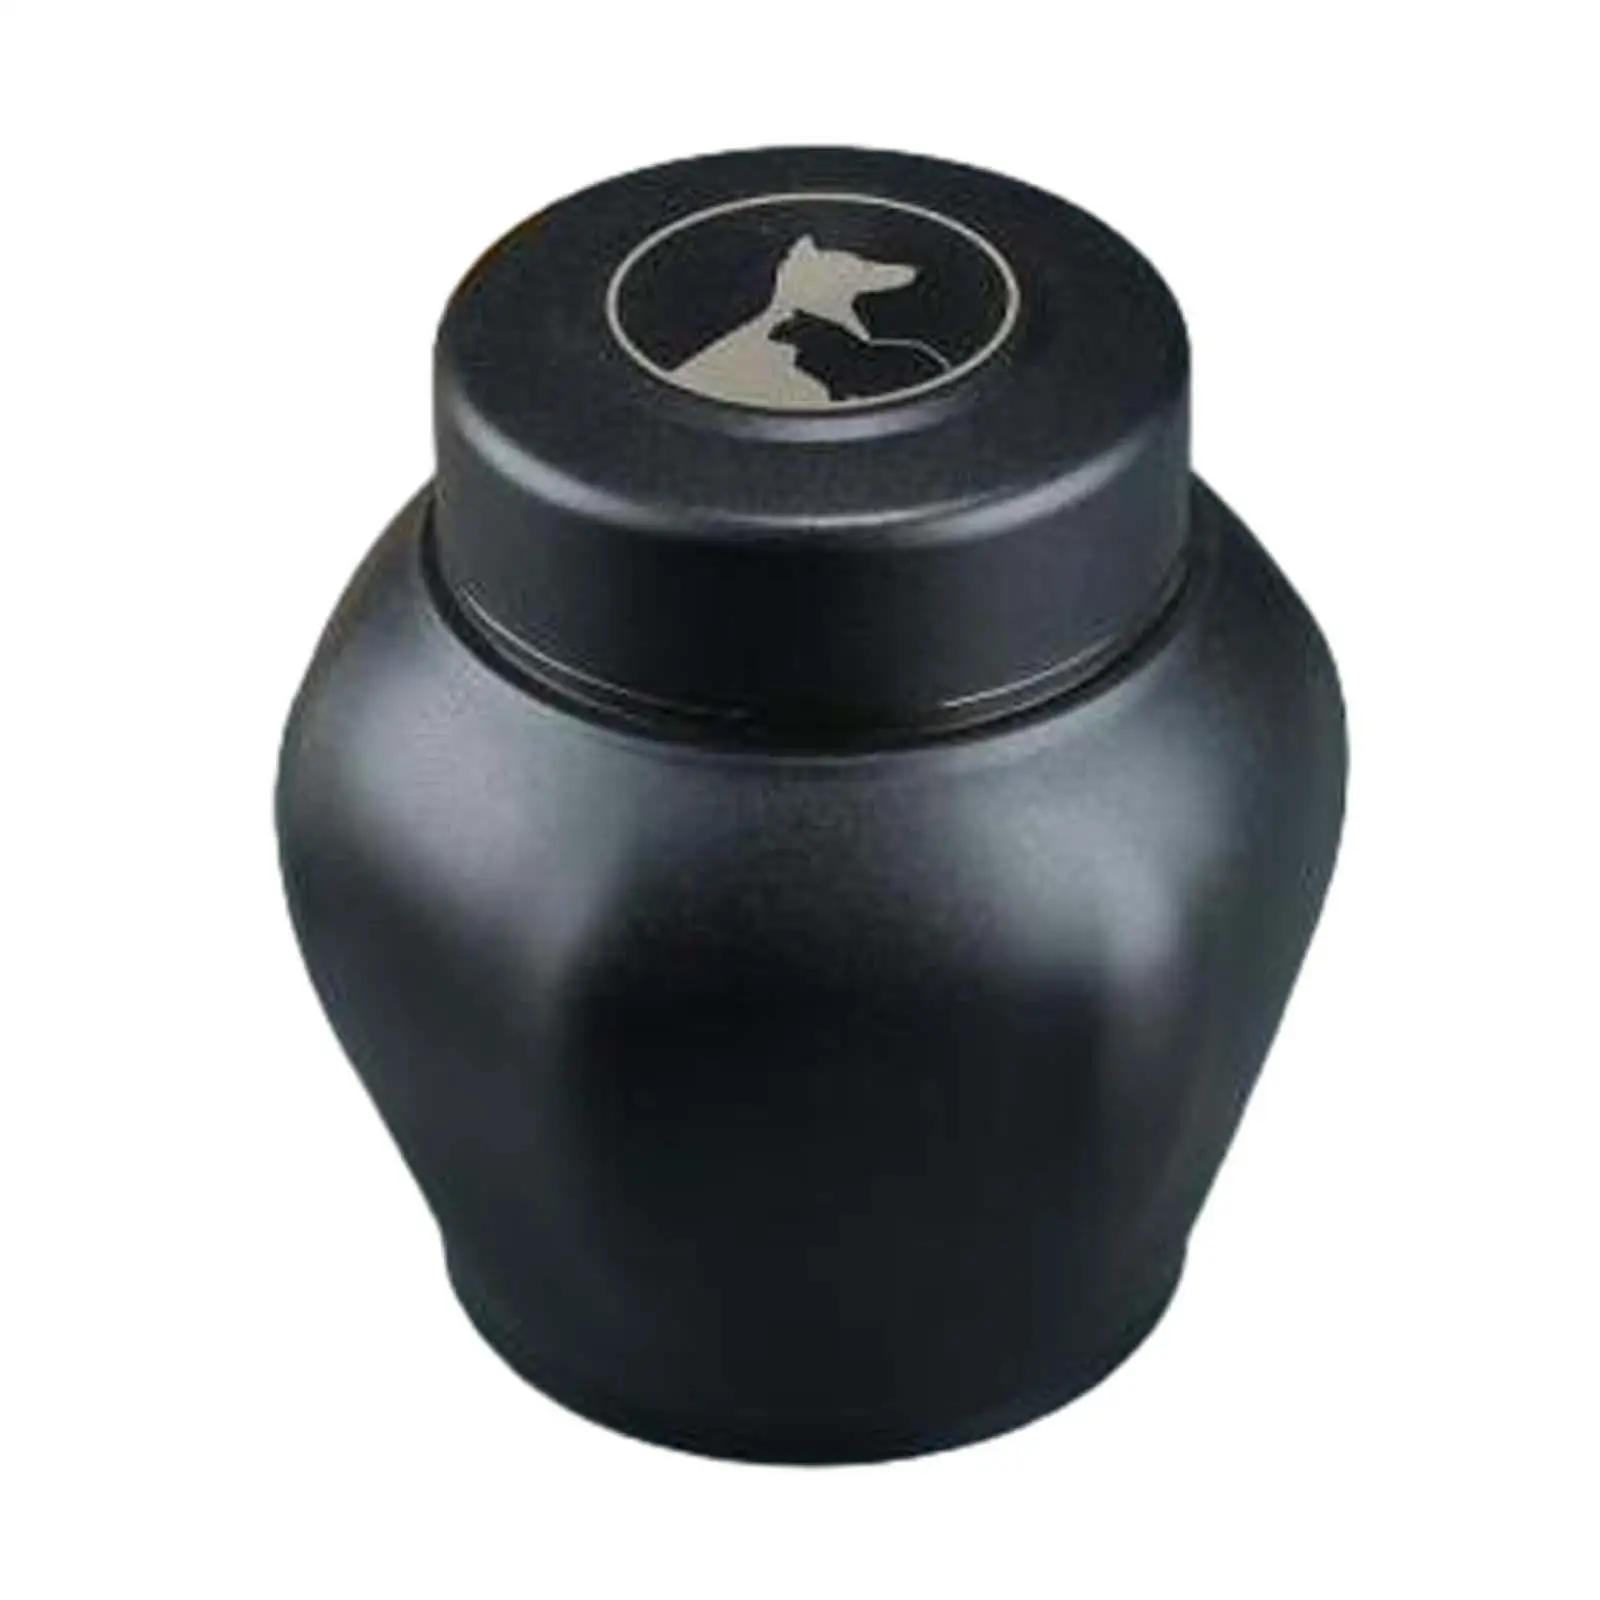 Pet Ash Urn Storage Container Memorial Keepsake Urns Dogs Cats Ash Holder for Puppy Dogs Cats Rabbit Bunny Small Animals